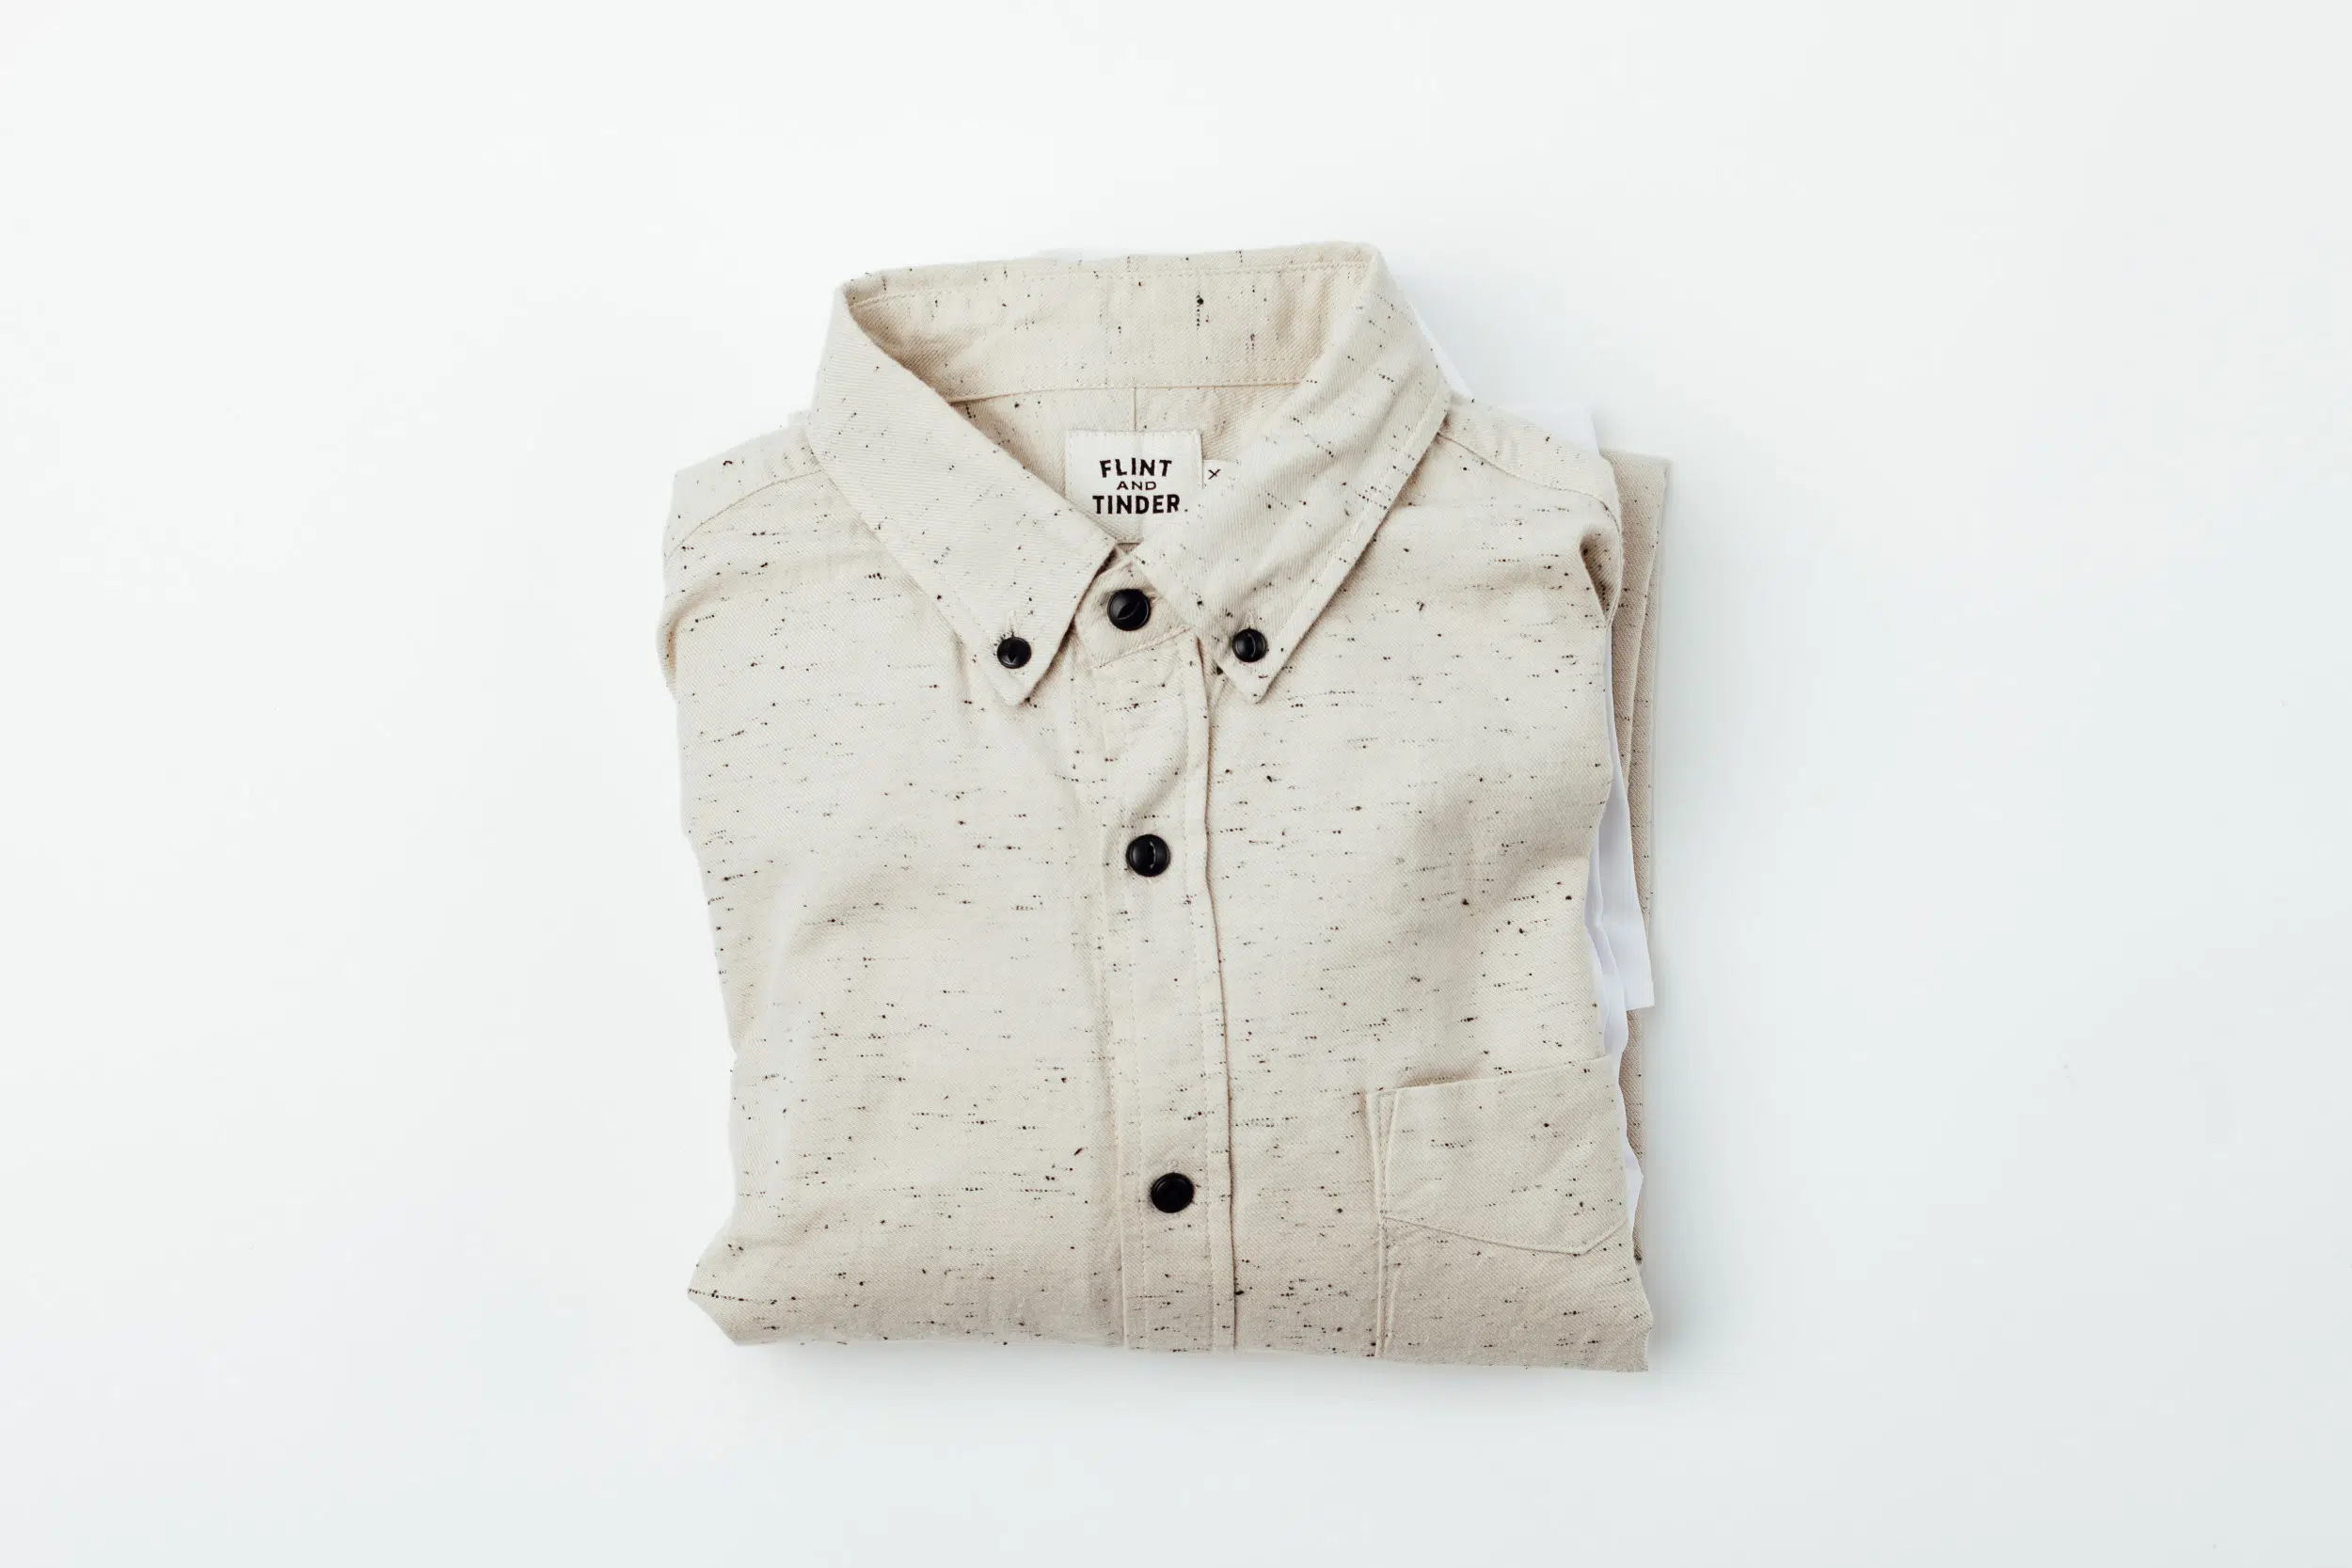 Huckberry Donegal Architect Shirt